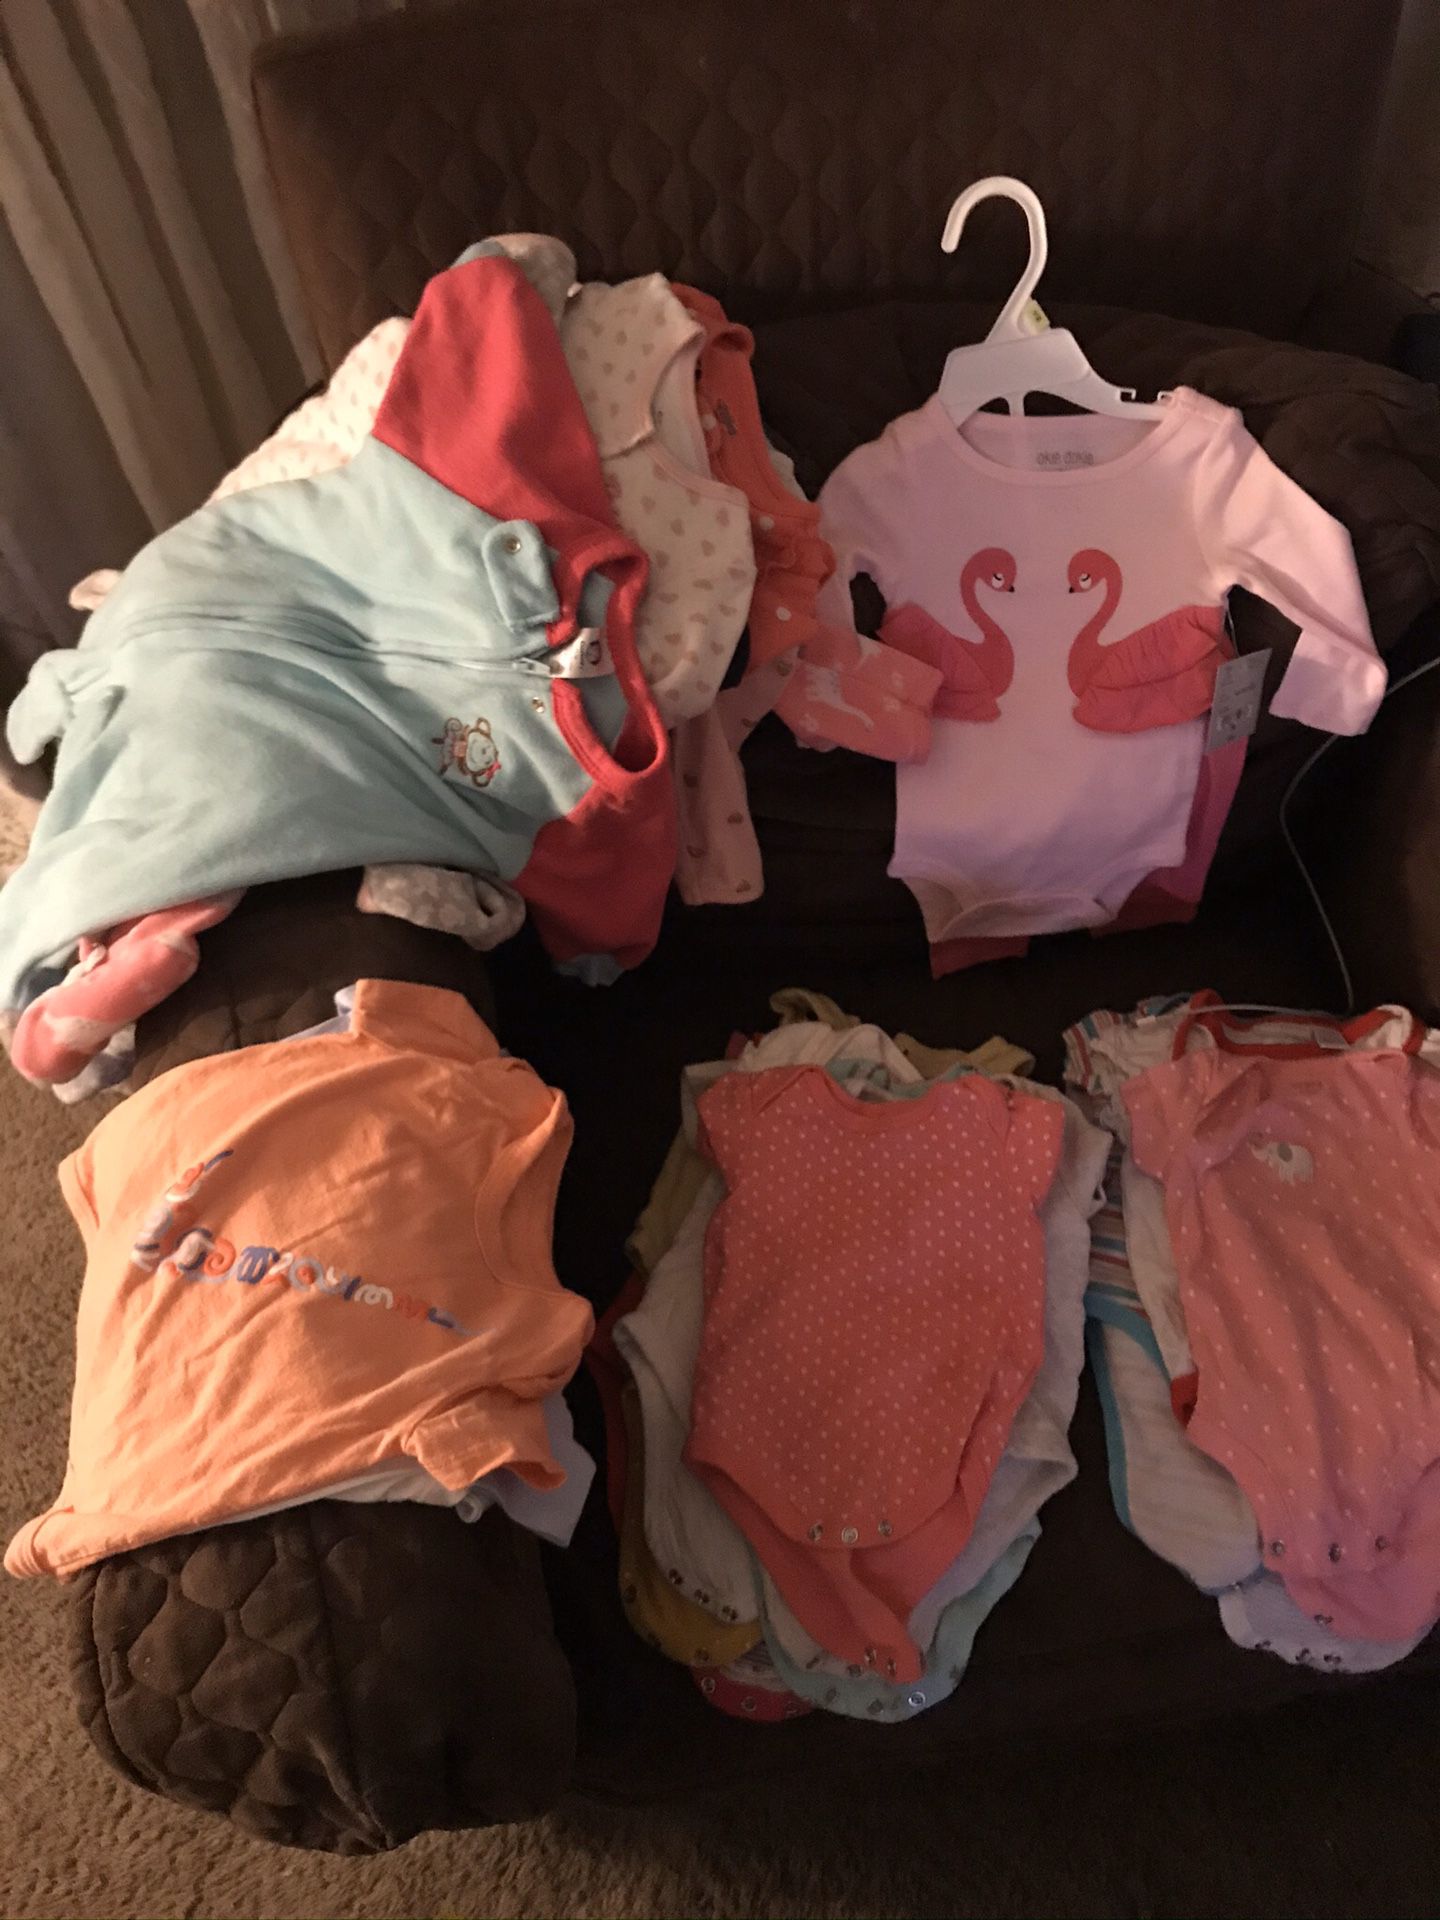 Baby clothes 3-6 month and 6-9 month